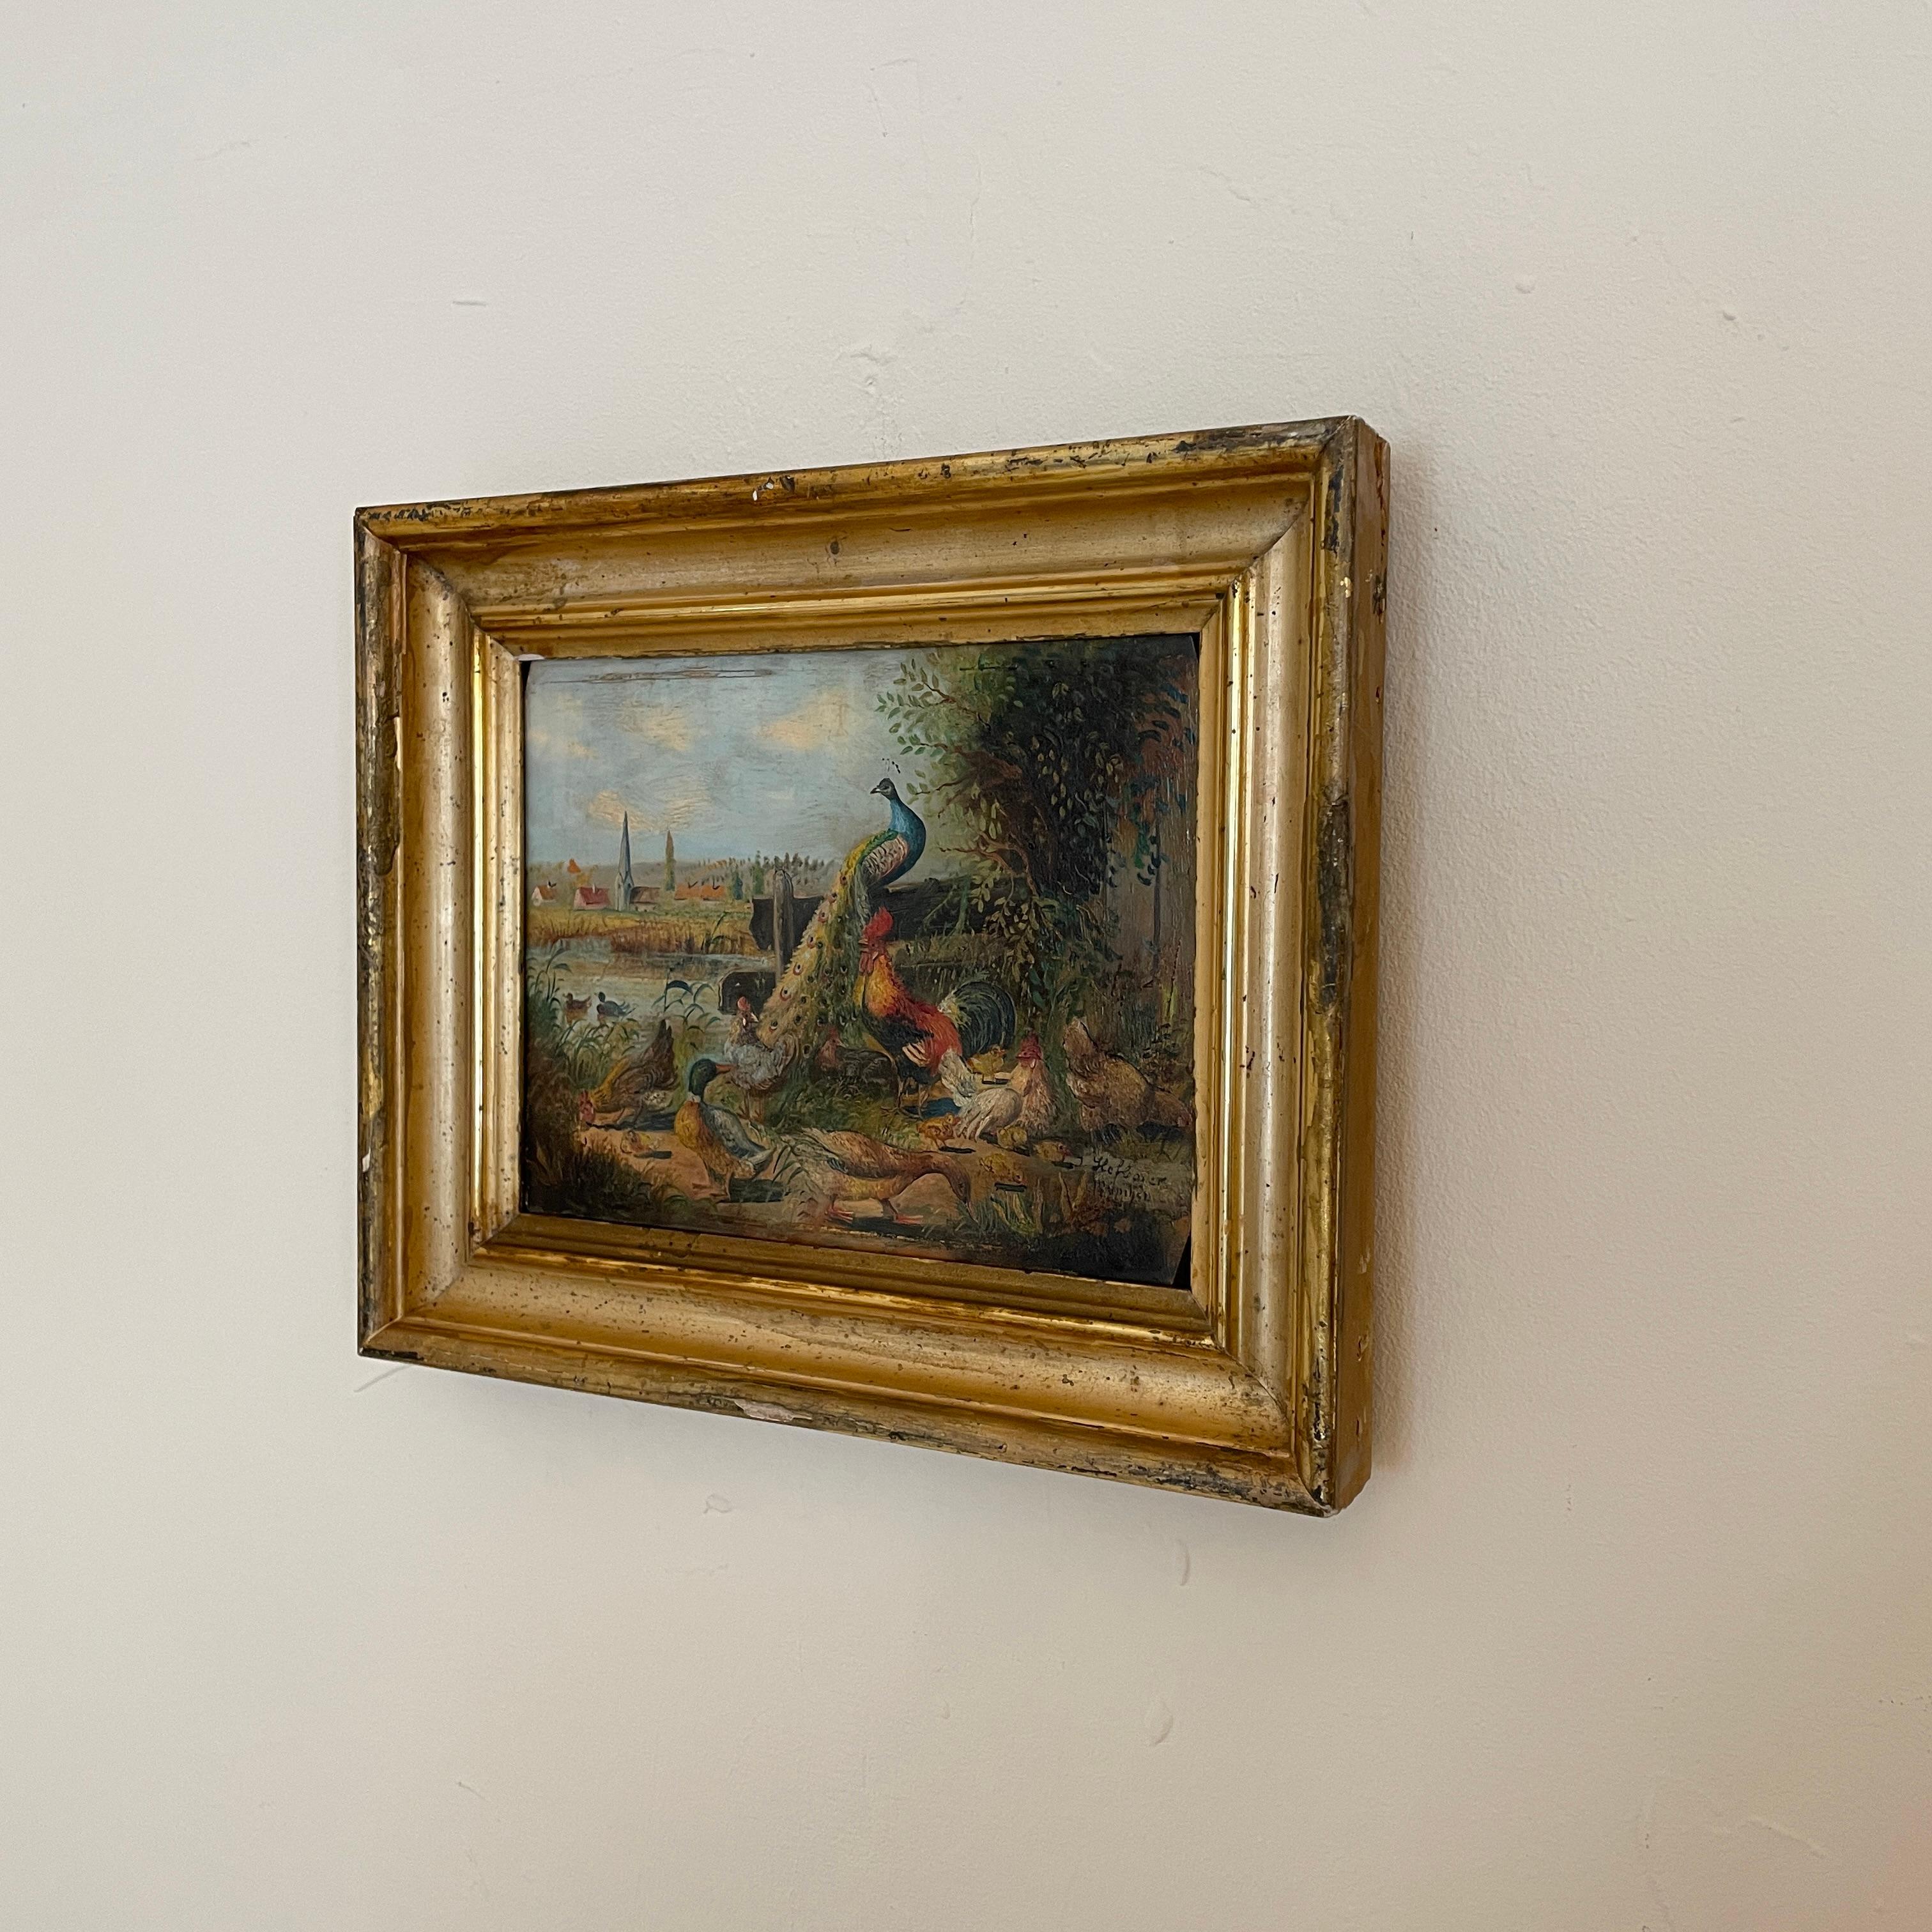 Folk Art 1950s German Oil Painting on Wood in an Old Gilded Frame by Josef Hofbauer For Sale